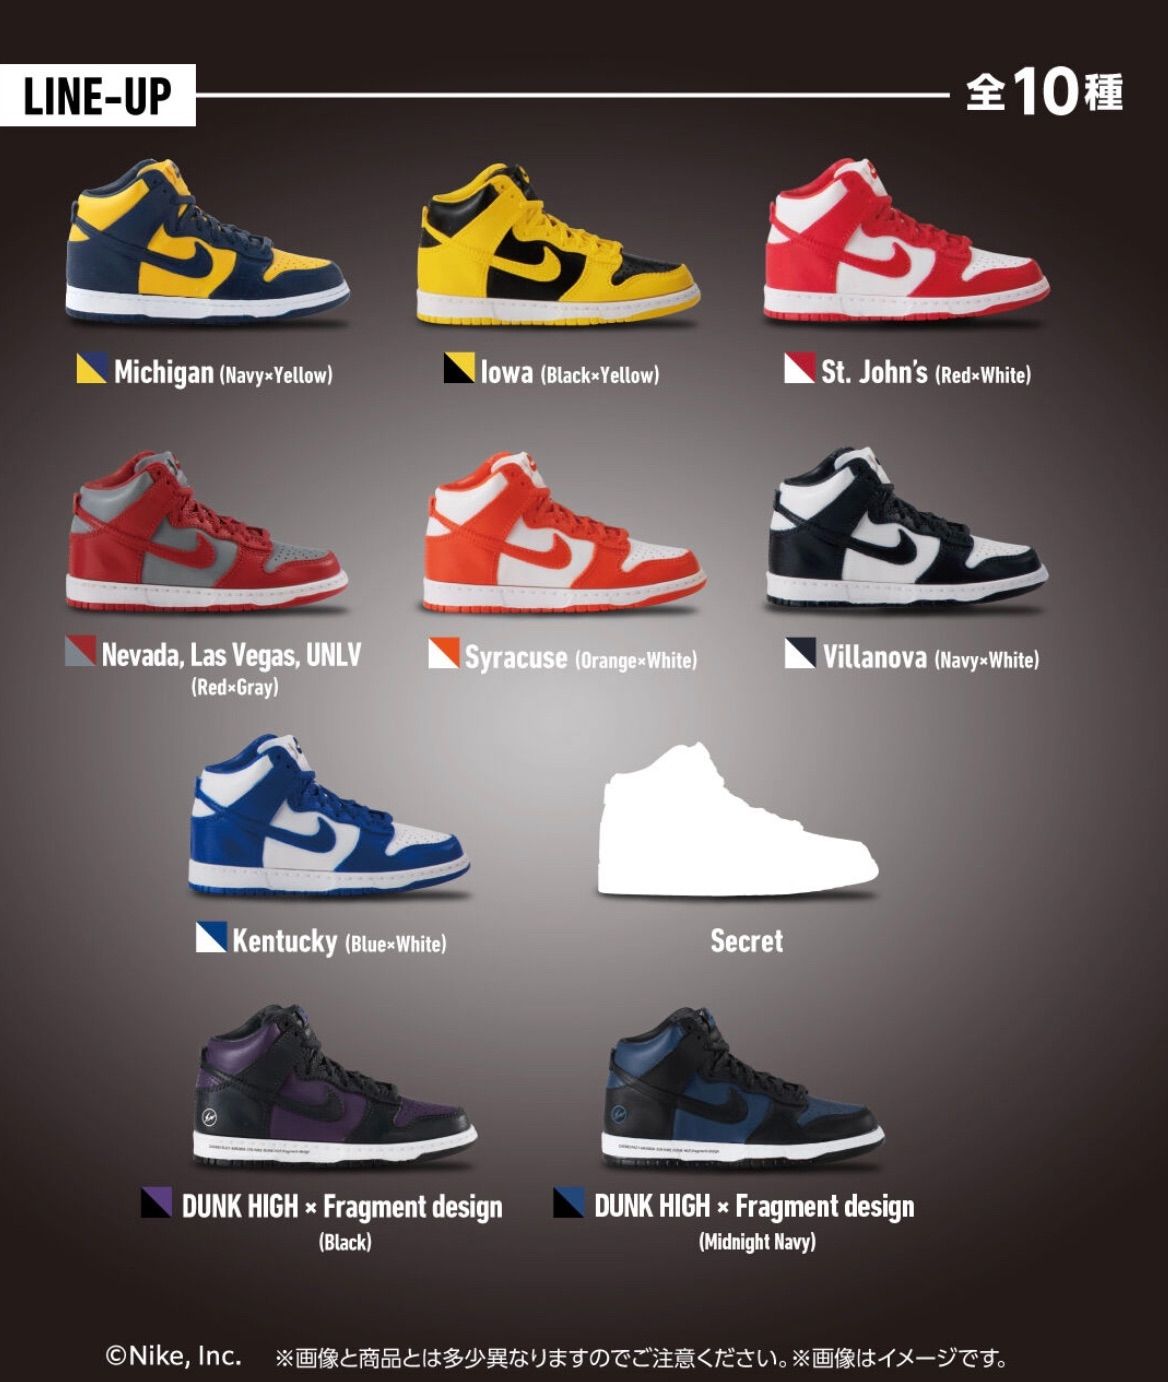 NIKE DUNK HIGH miniature collection 全種